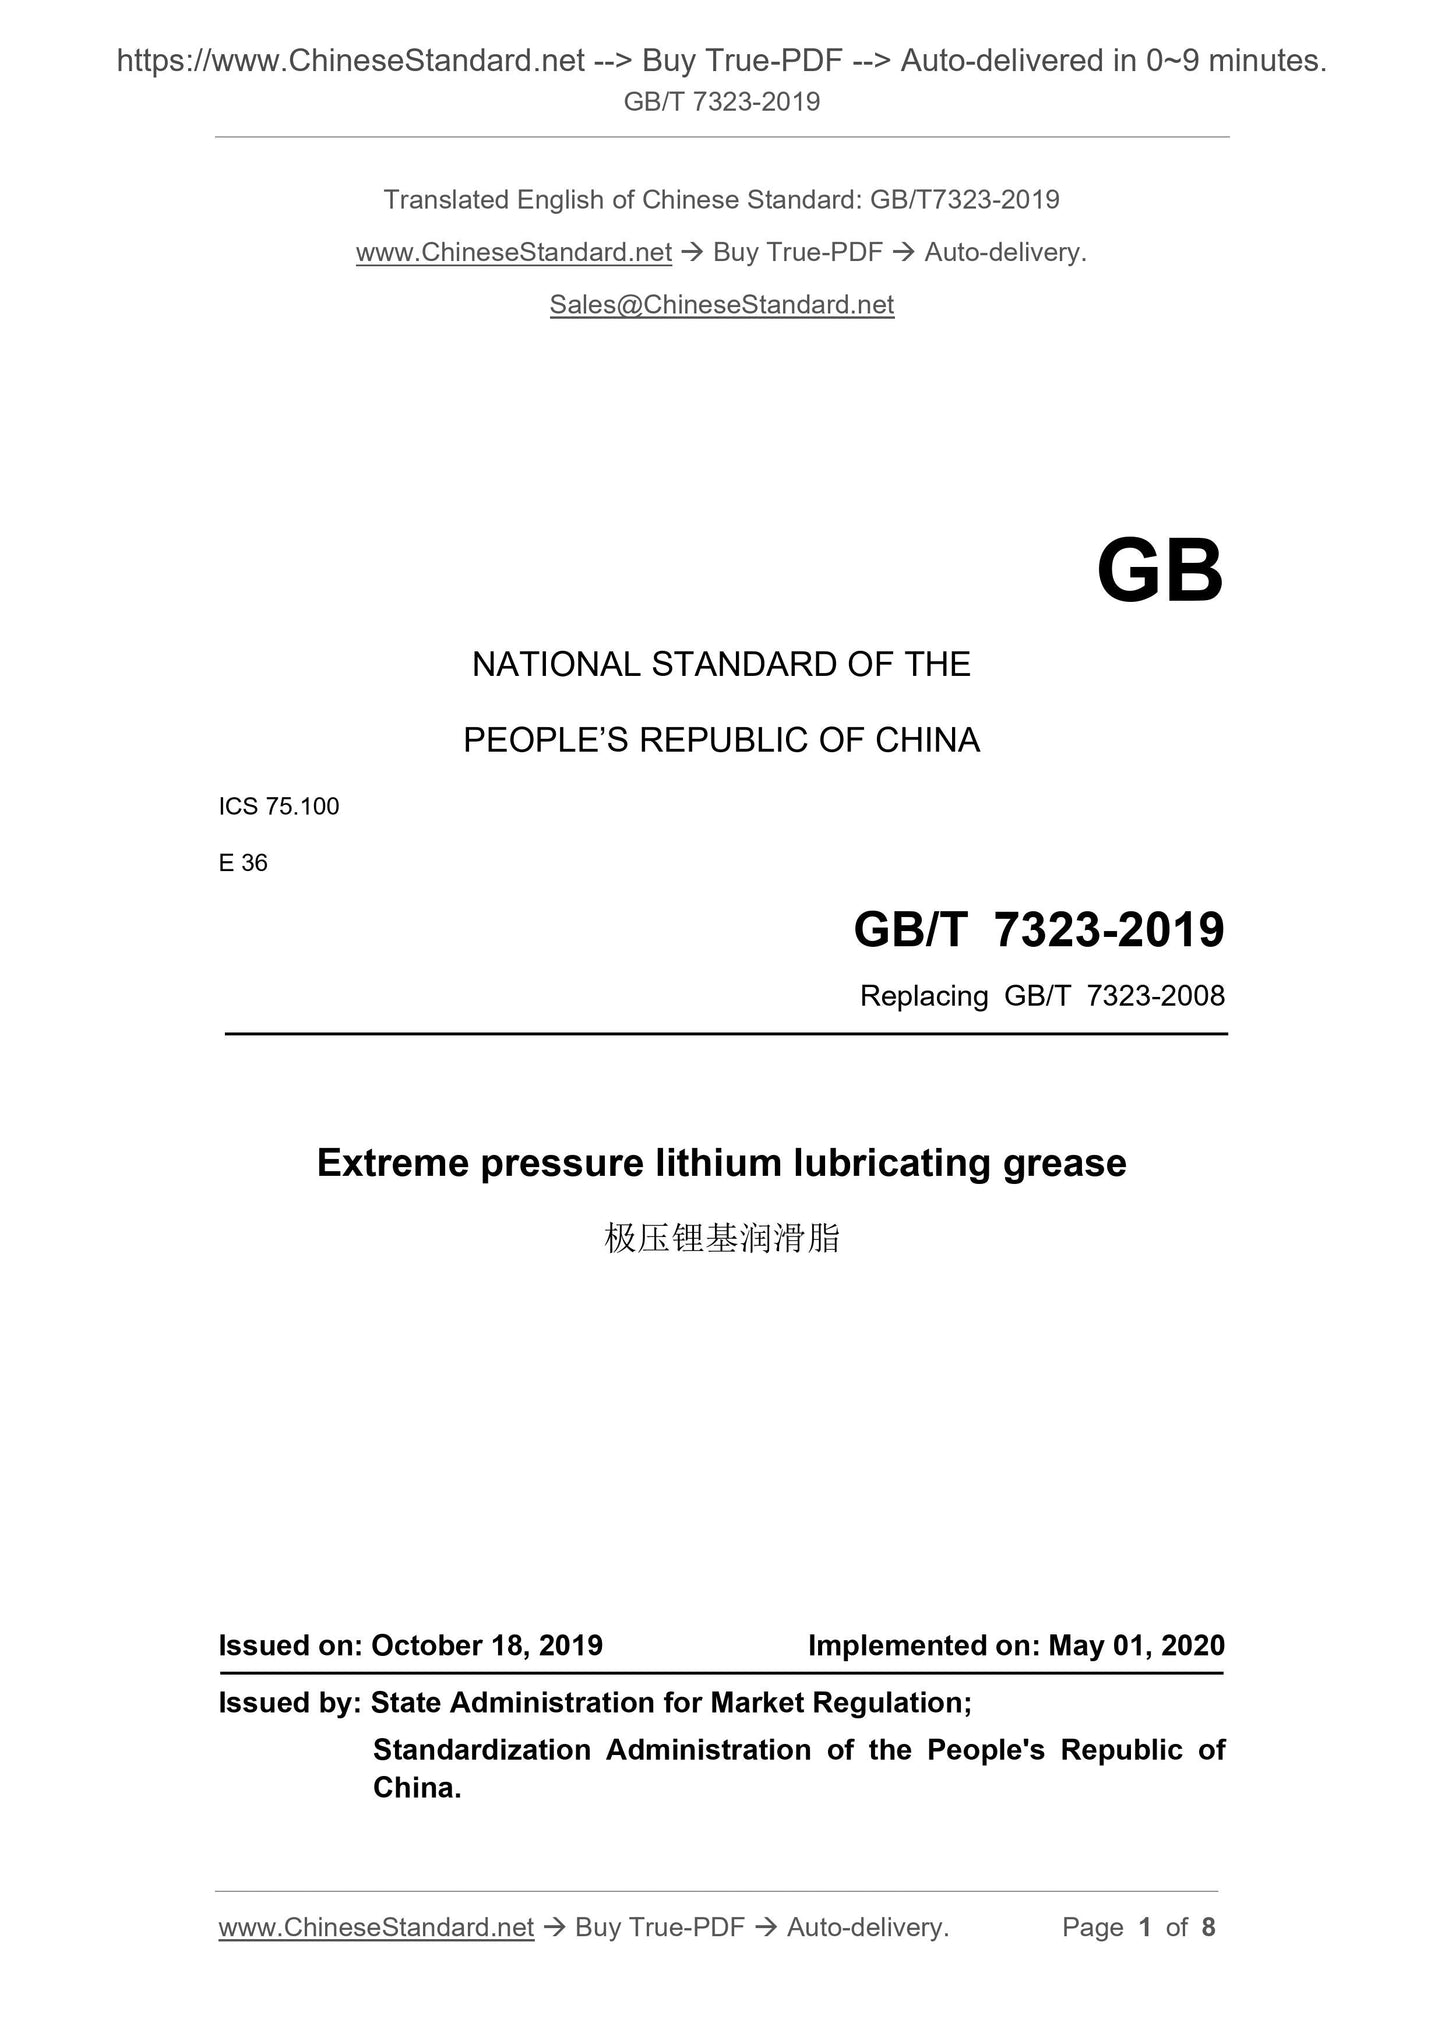 GB/T 7323-2019 Page 1